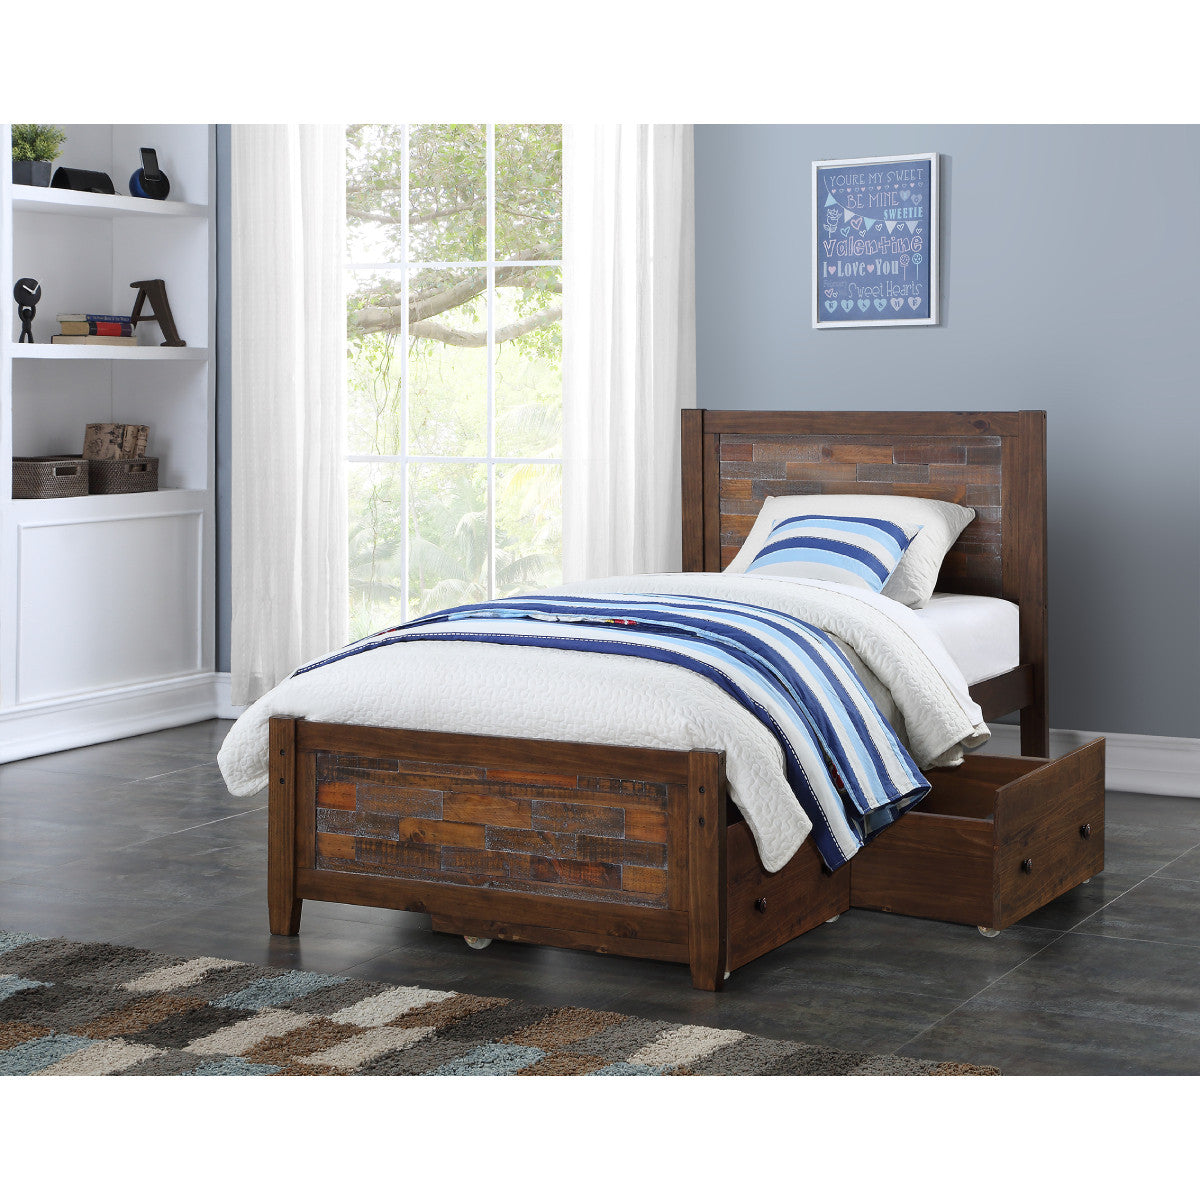 TWIN ARTESIAN BED WITH DUAL UNDER BED DRAWERS IN BROWN GLAZE FINISH